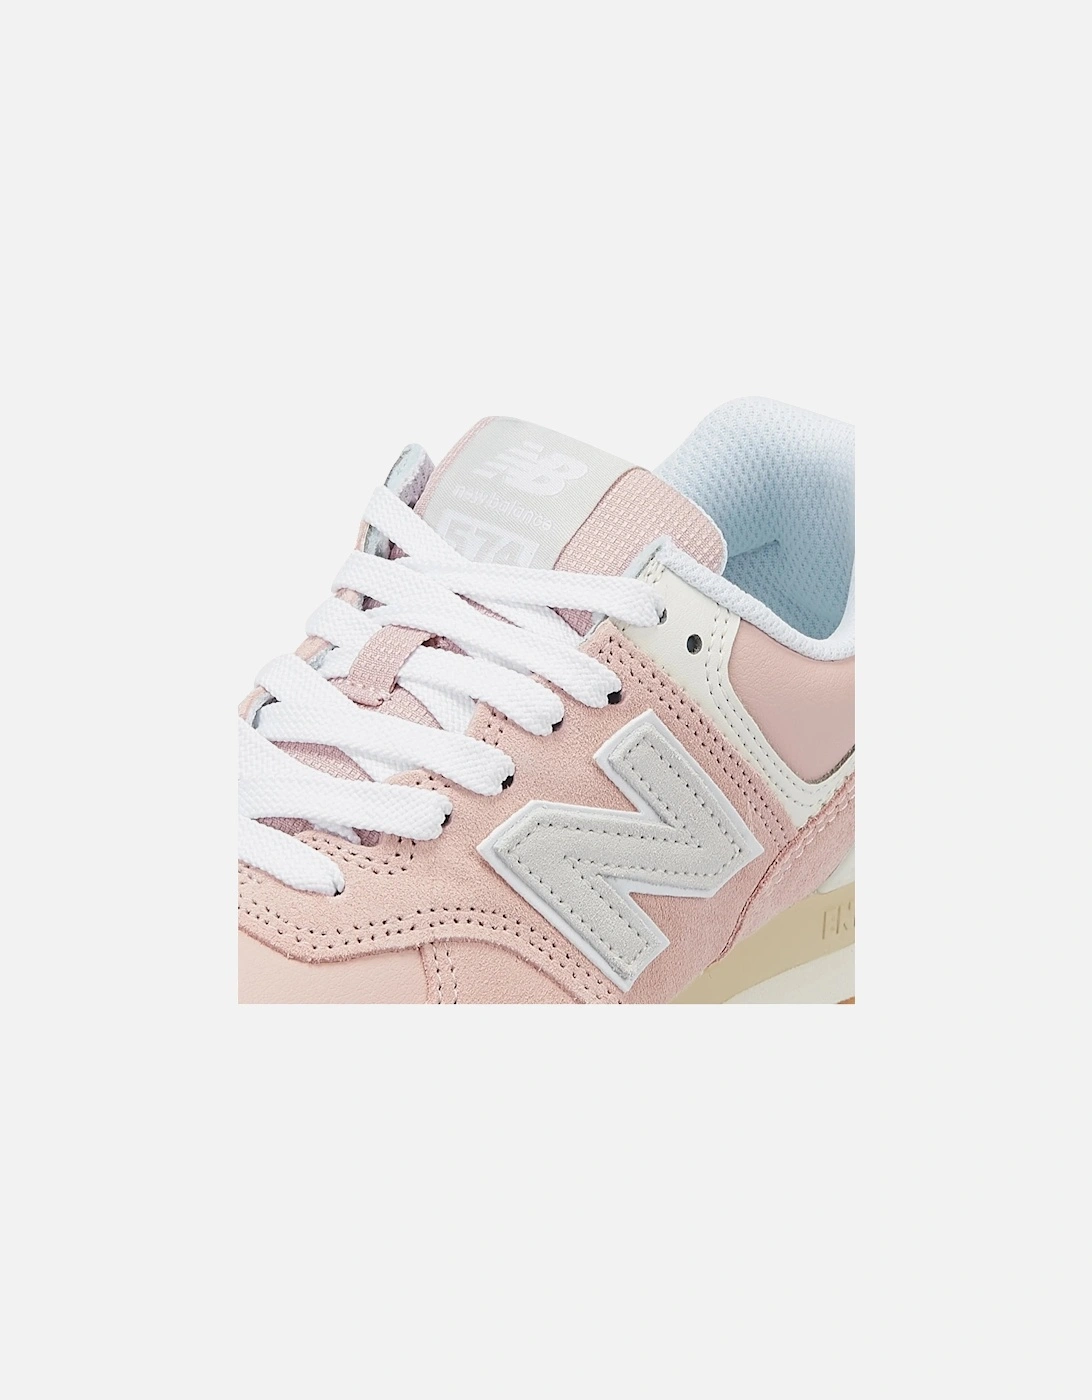 Orb Suede Women's Pink Trainers